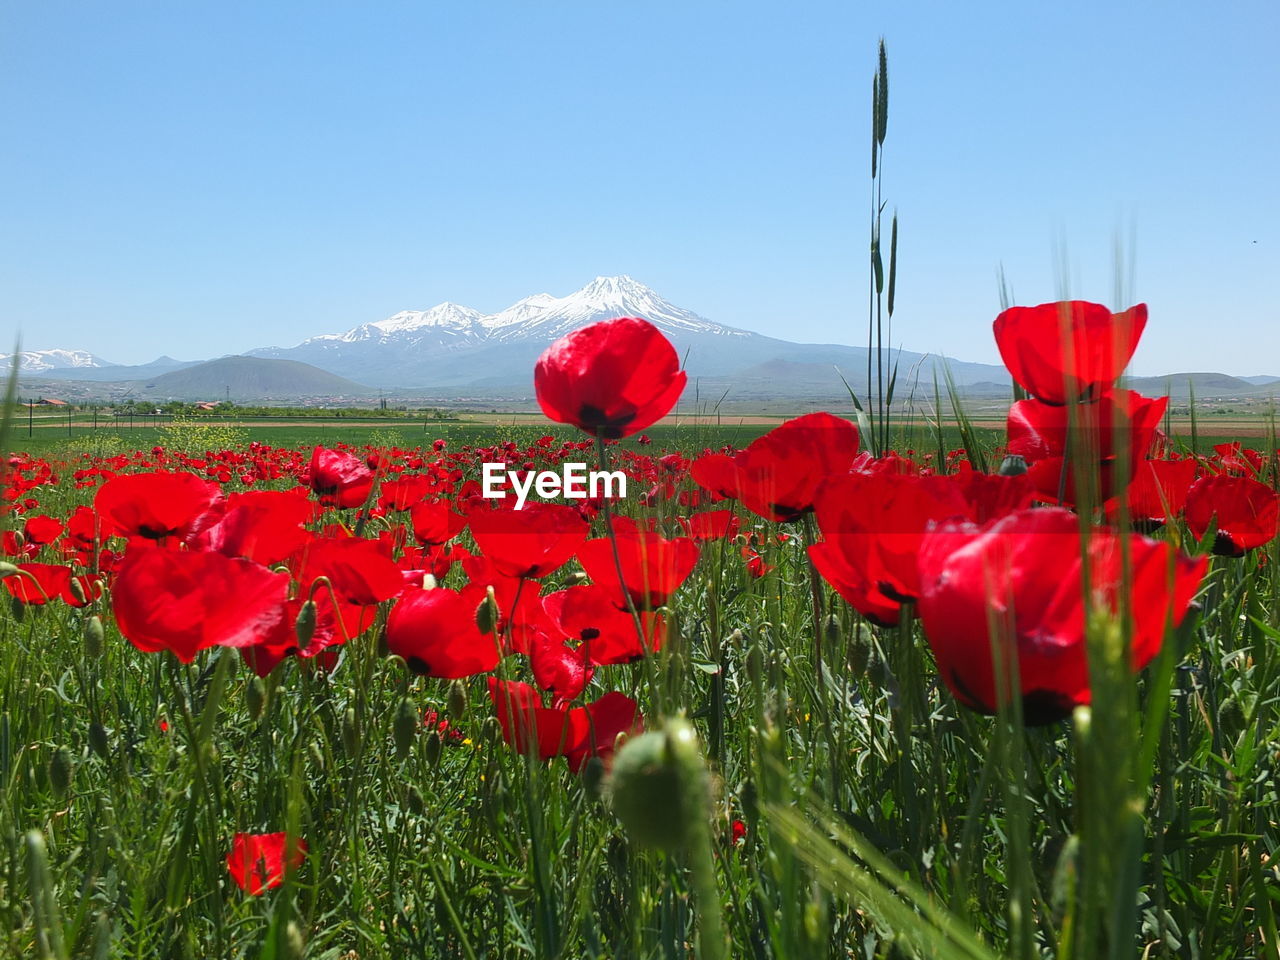 CLOSE-UP OF RED POPPY FLOWERS GROWING ON FIELD